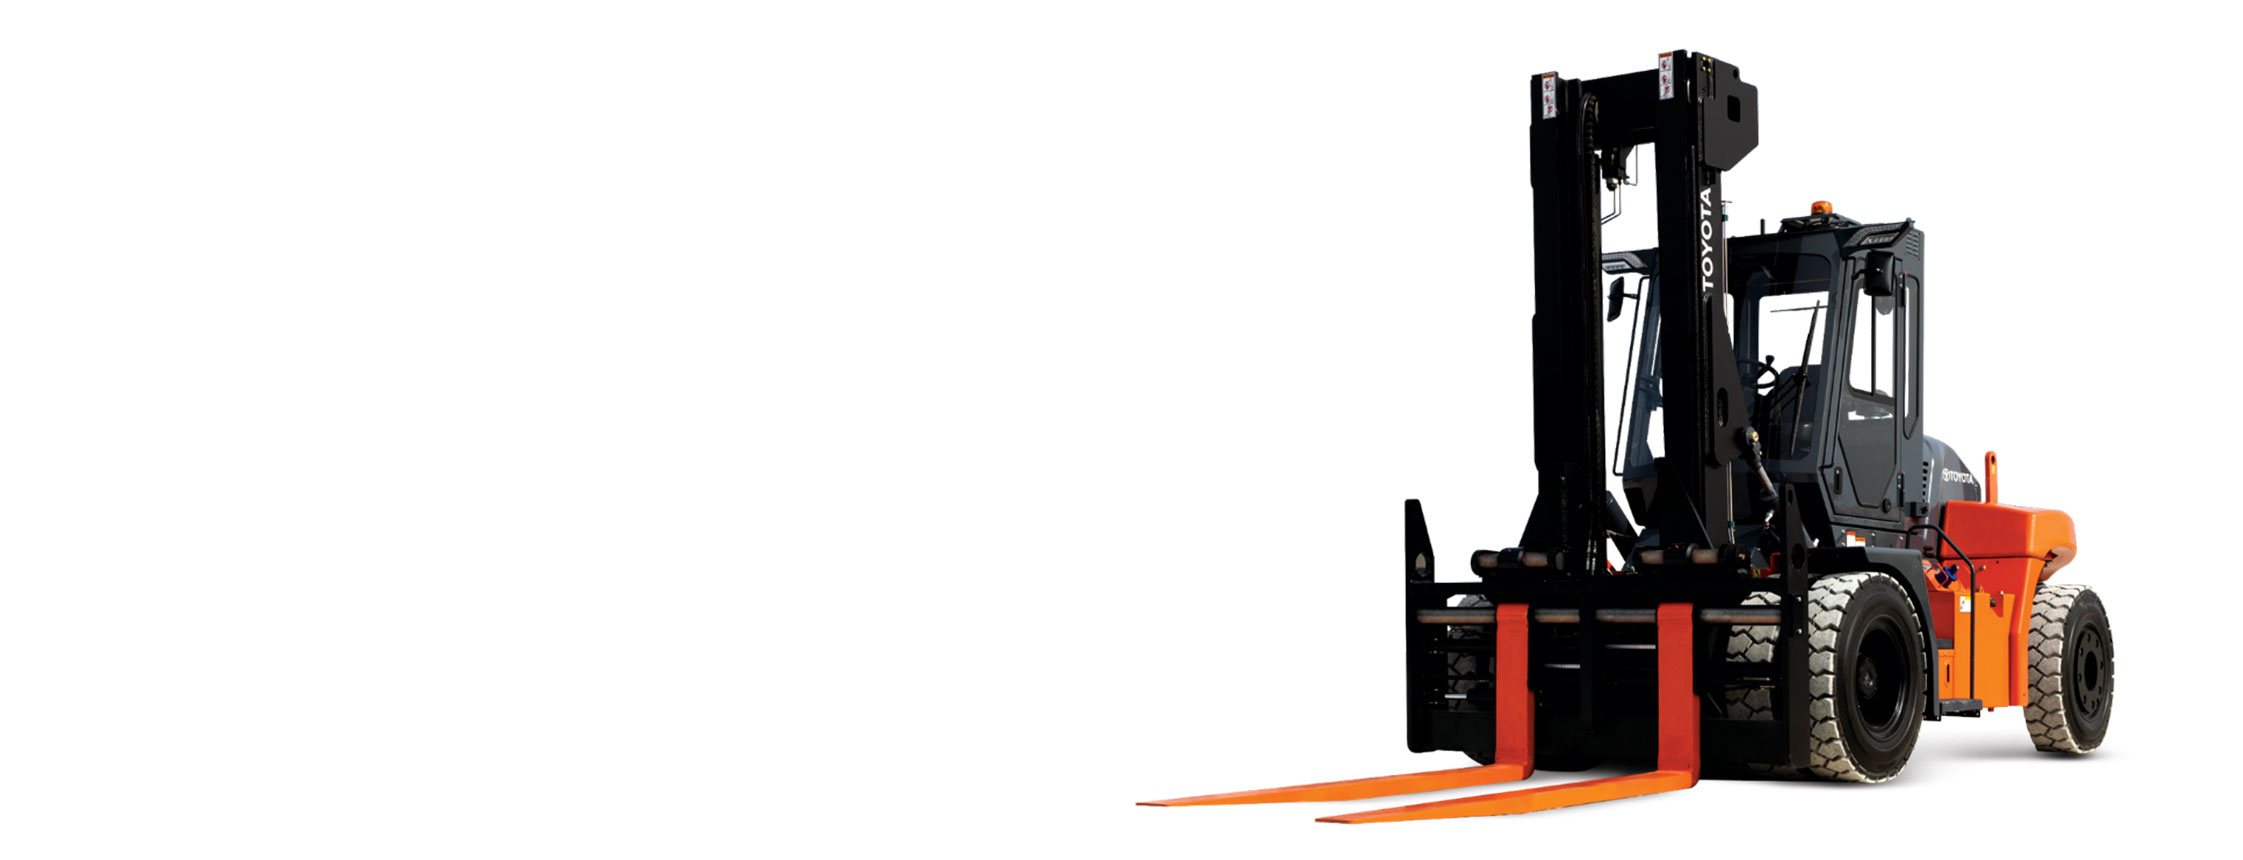 Looking for that “hard to find” large capacity forklift?